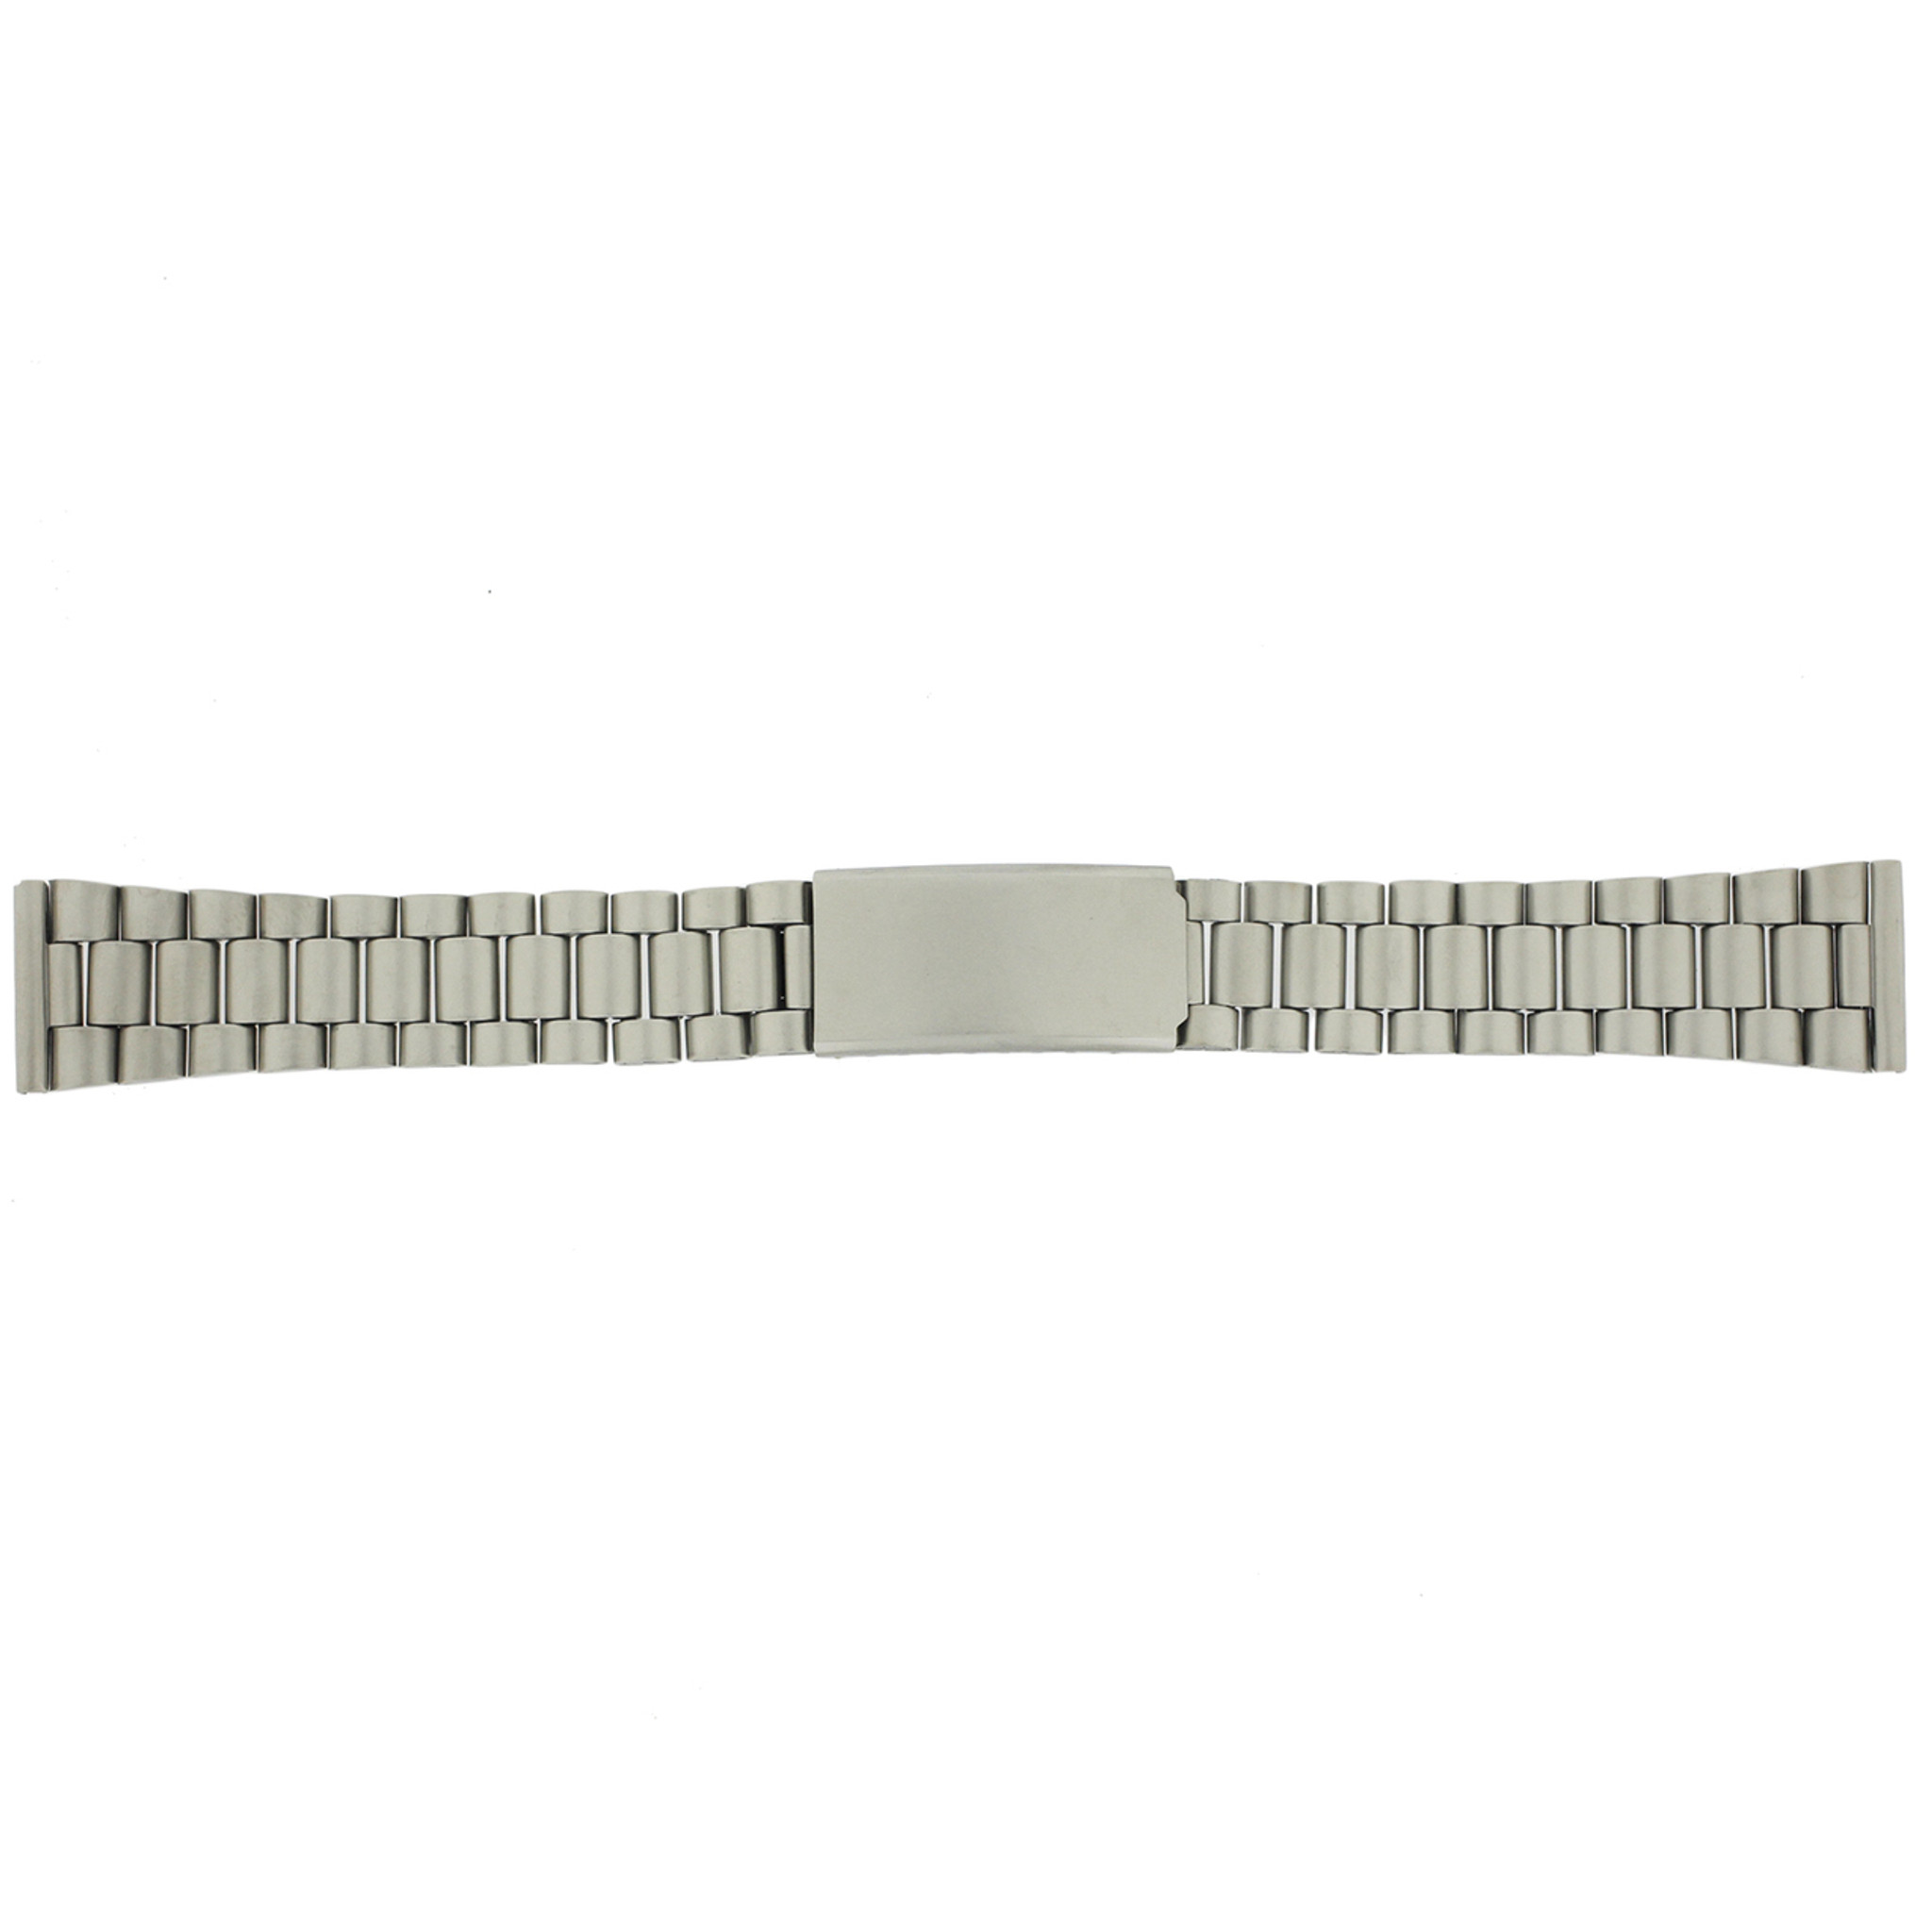  SINAIKE 18mm Black Watch Band Premium Solid Stainless Steel  Metal Replacement Bracelet Strap for Men's Women's Watch : SINAIKE:  Clothing, Shoes & Jewelry